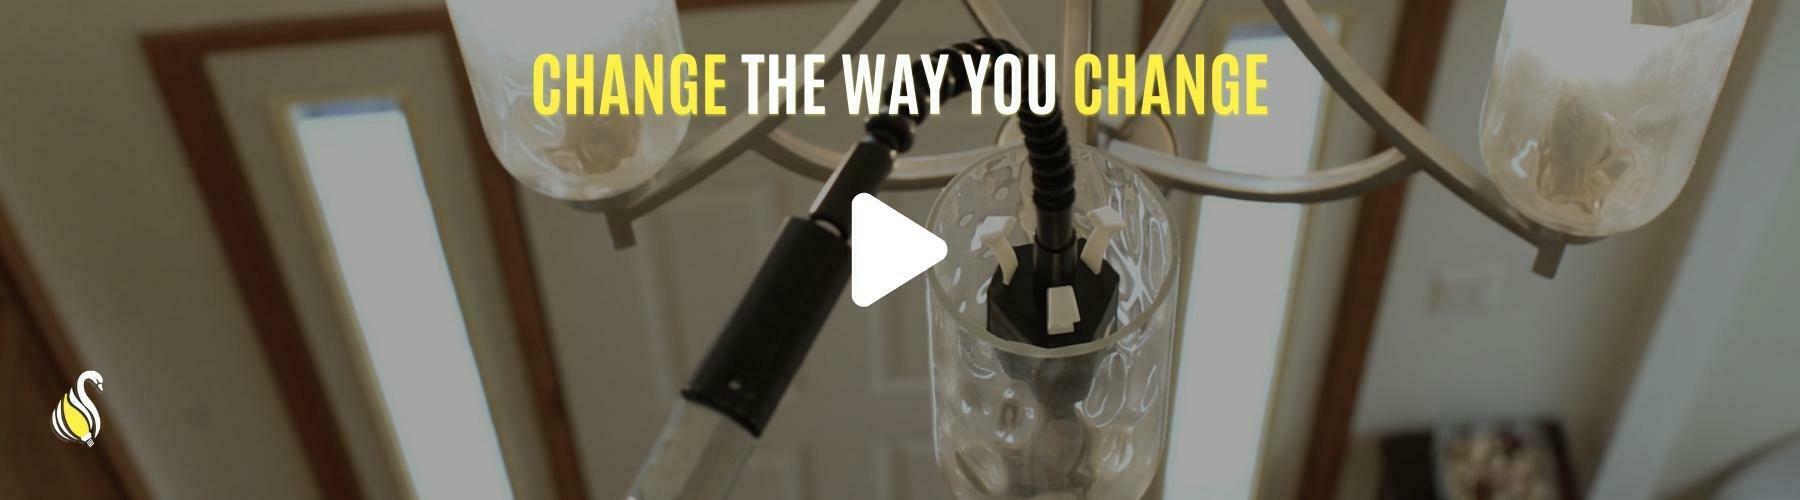 video of how the chandelier swan works to change high chandelier candelabra bulbs